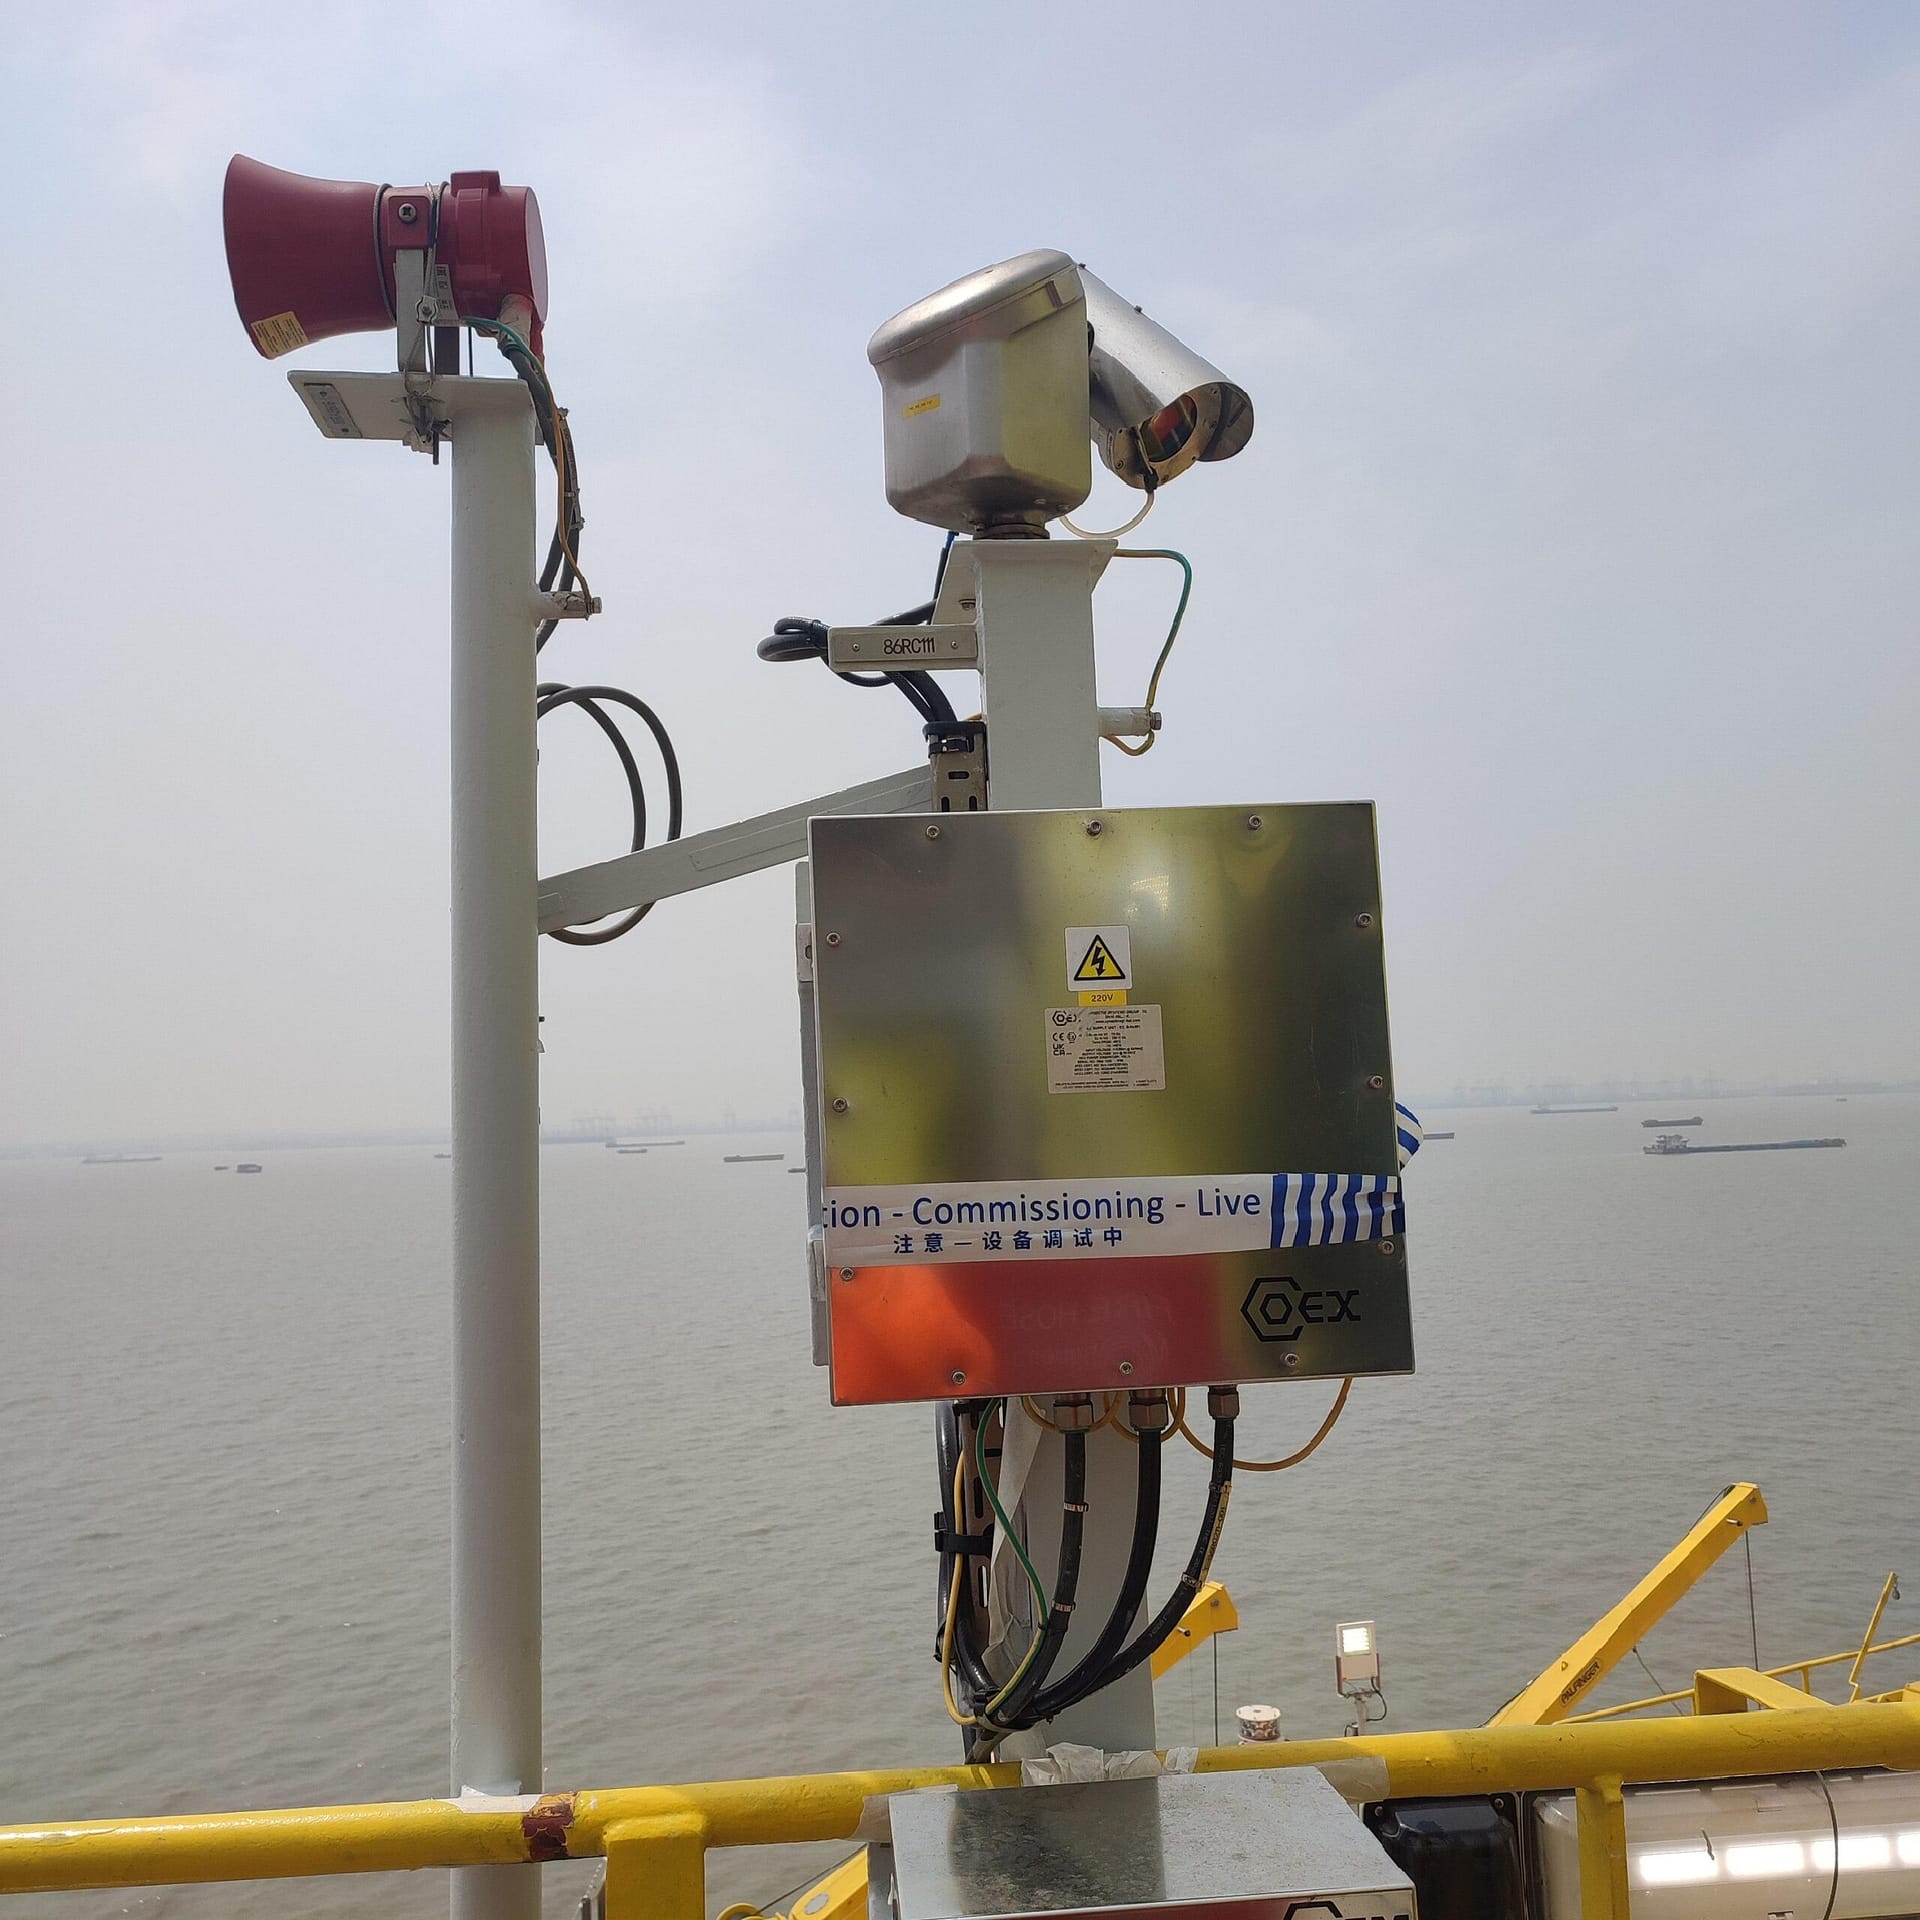 PAGA systems for fpso topside modules